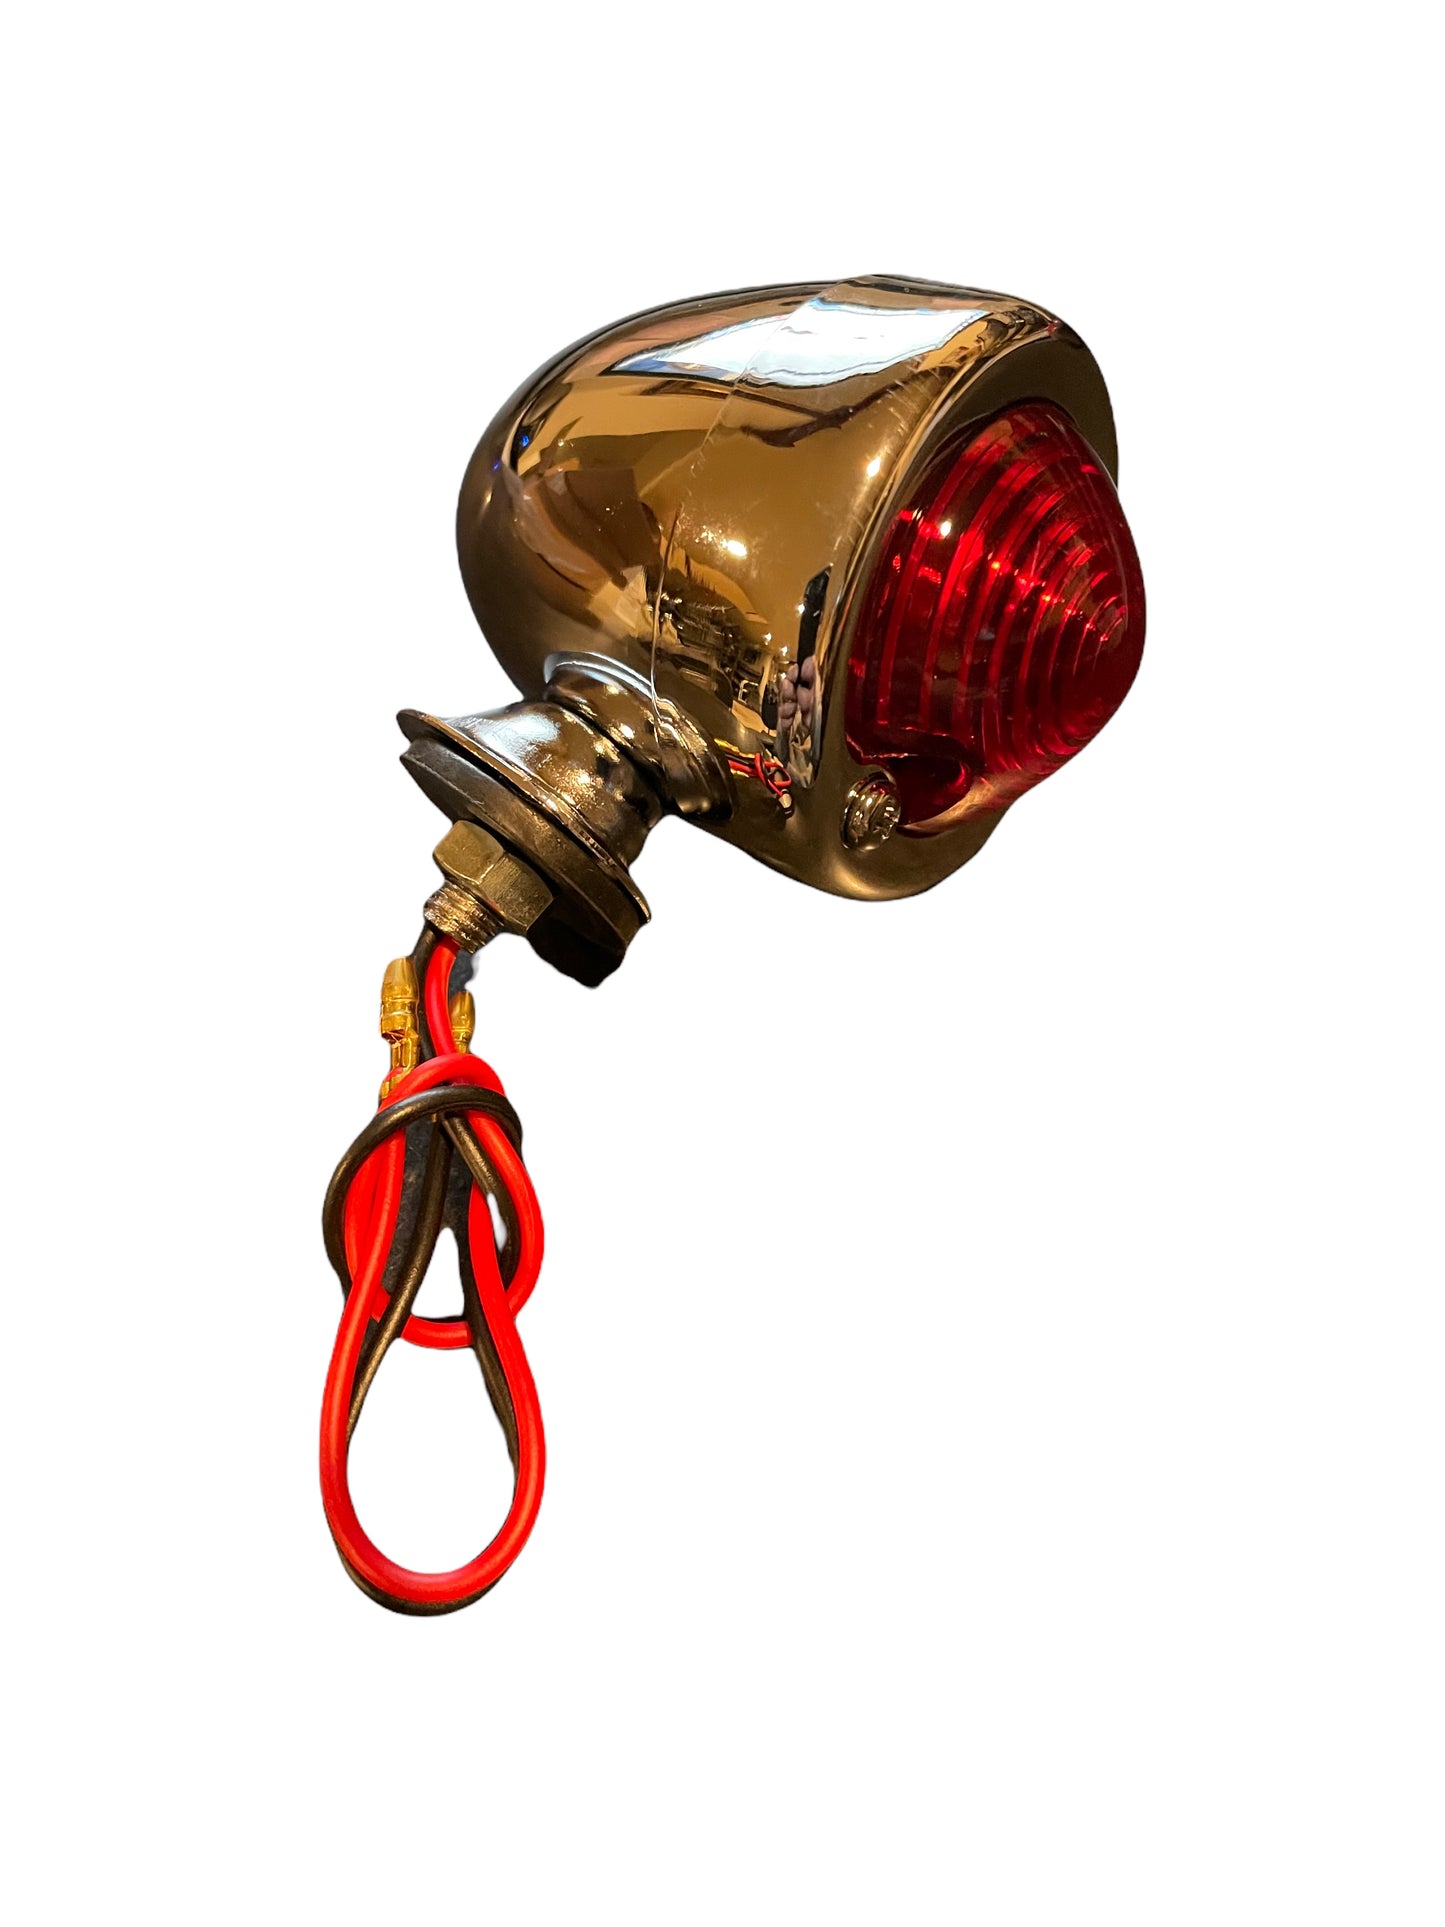 Tail Light with red lens with dual filament bullet style